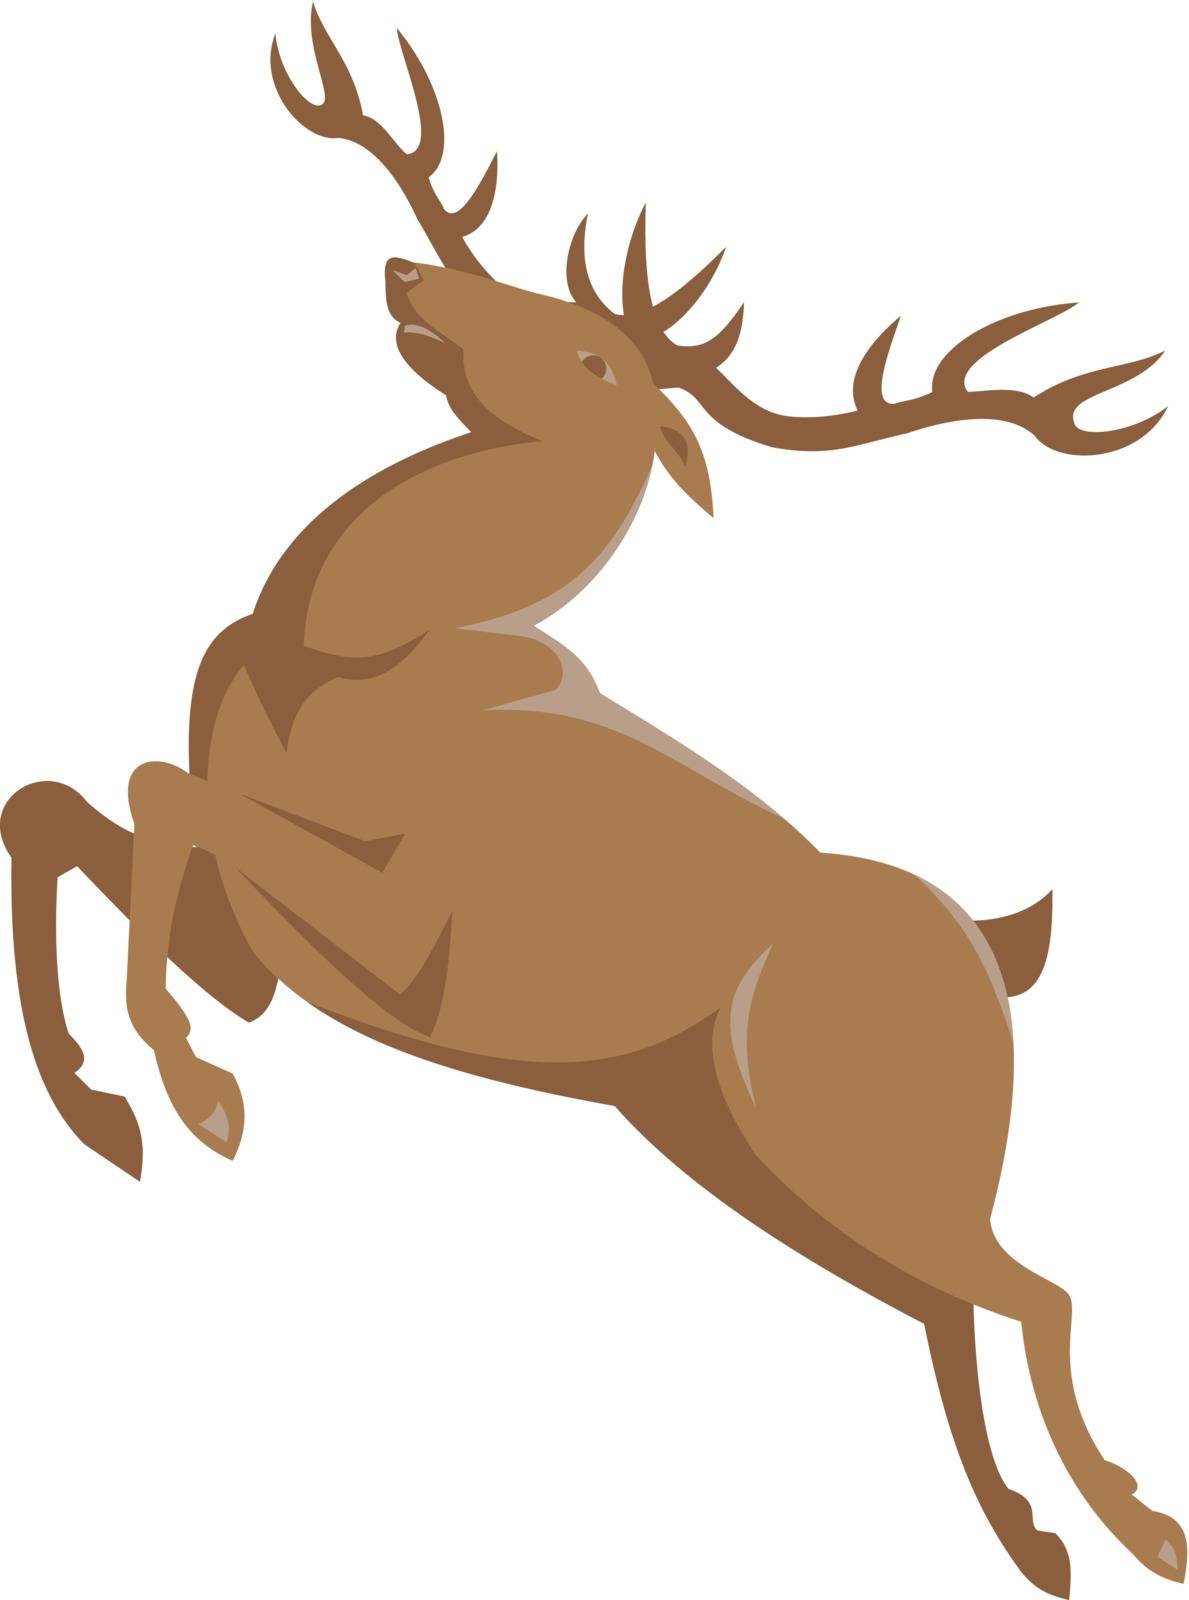 vector illustration of a stag buck elk deer jumping done in retro art deco style.